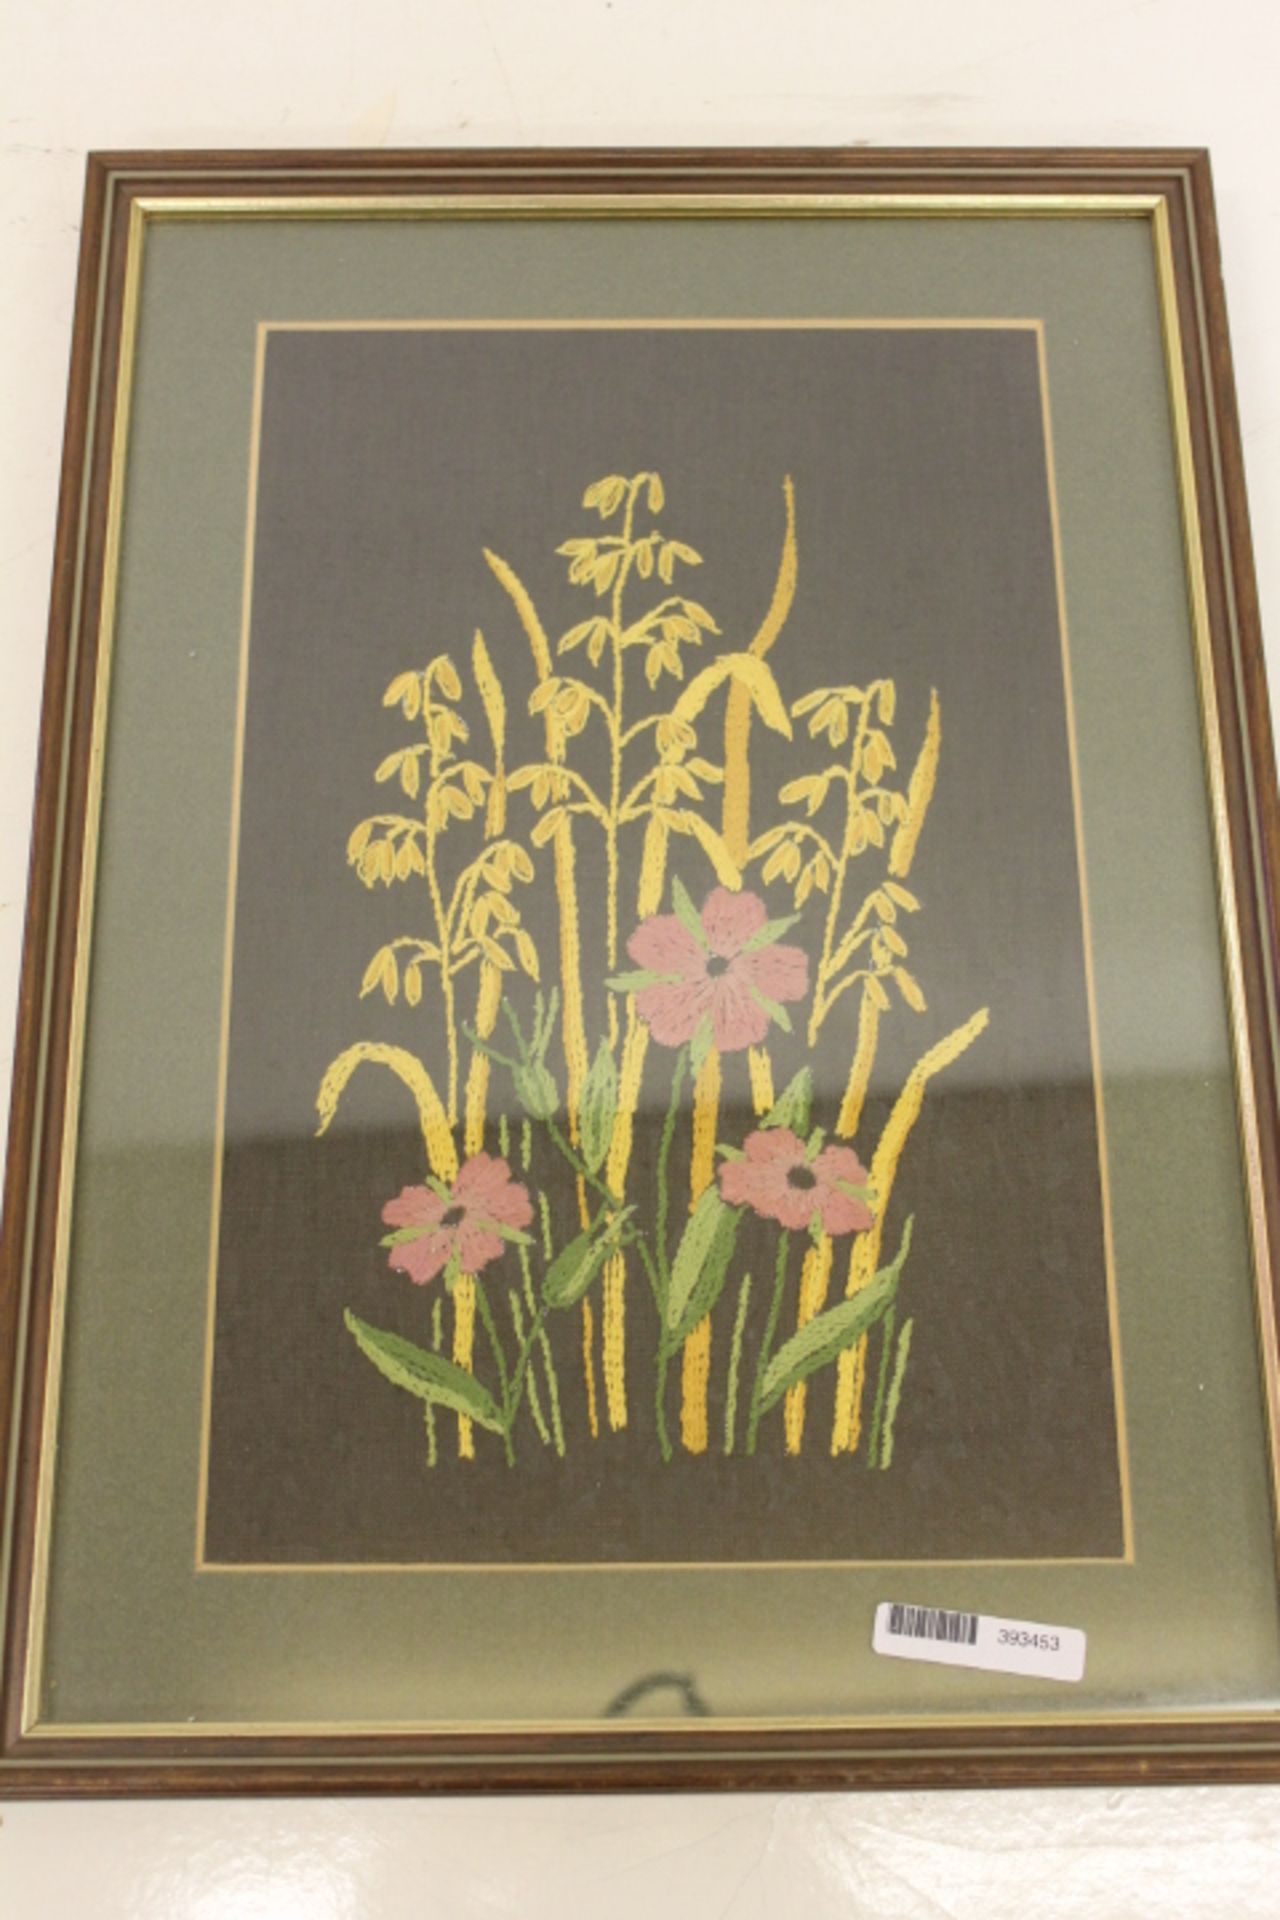 Framed Embroidered Picture Of Flowers